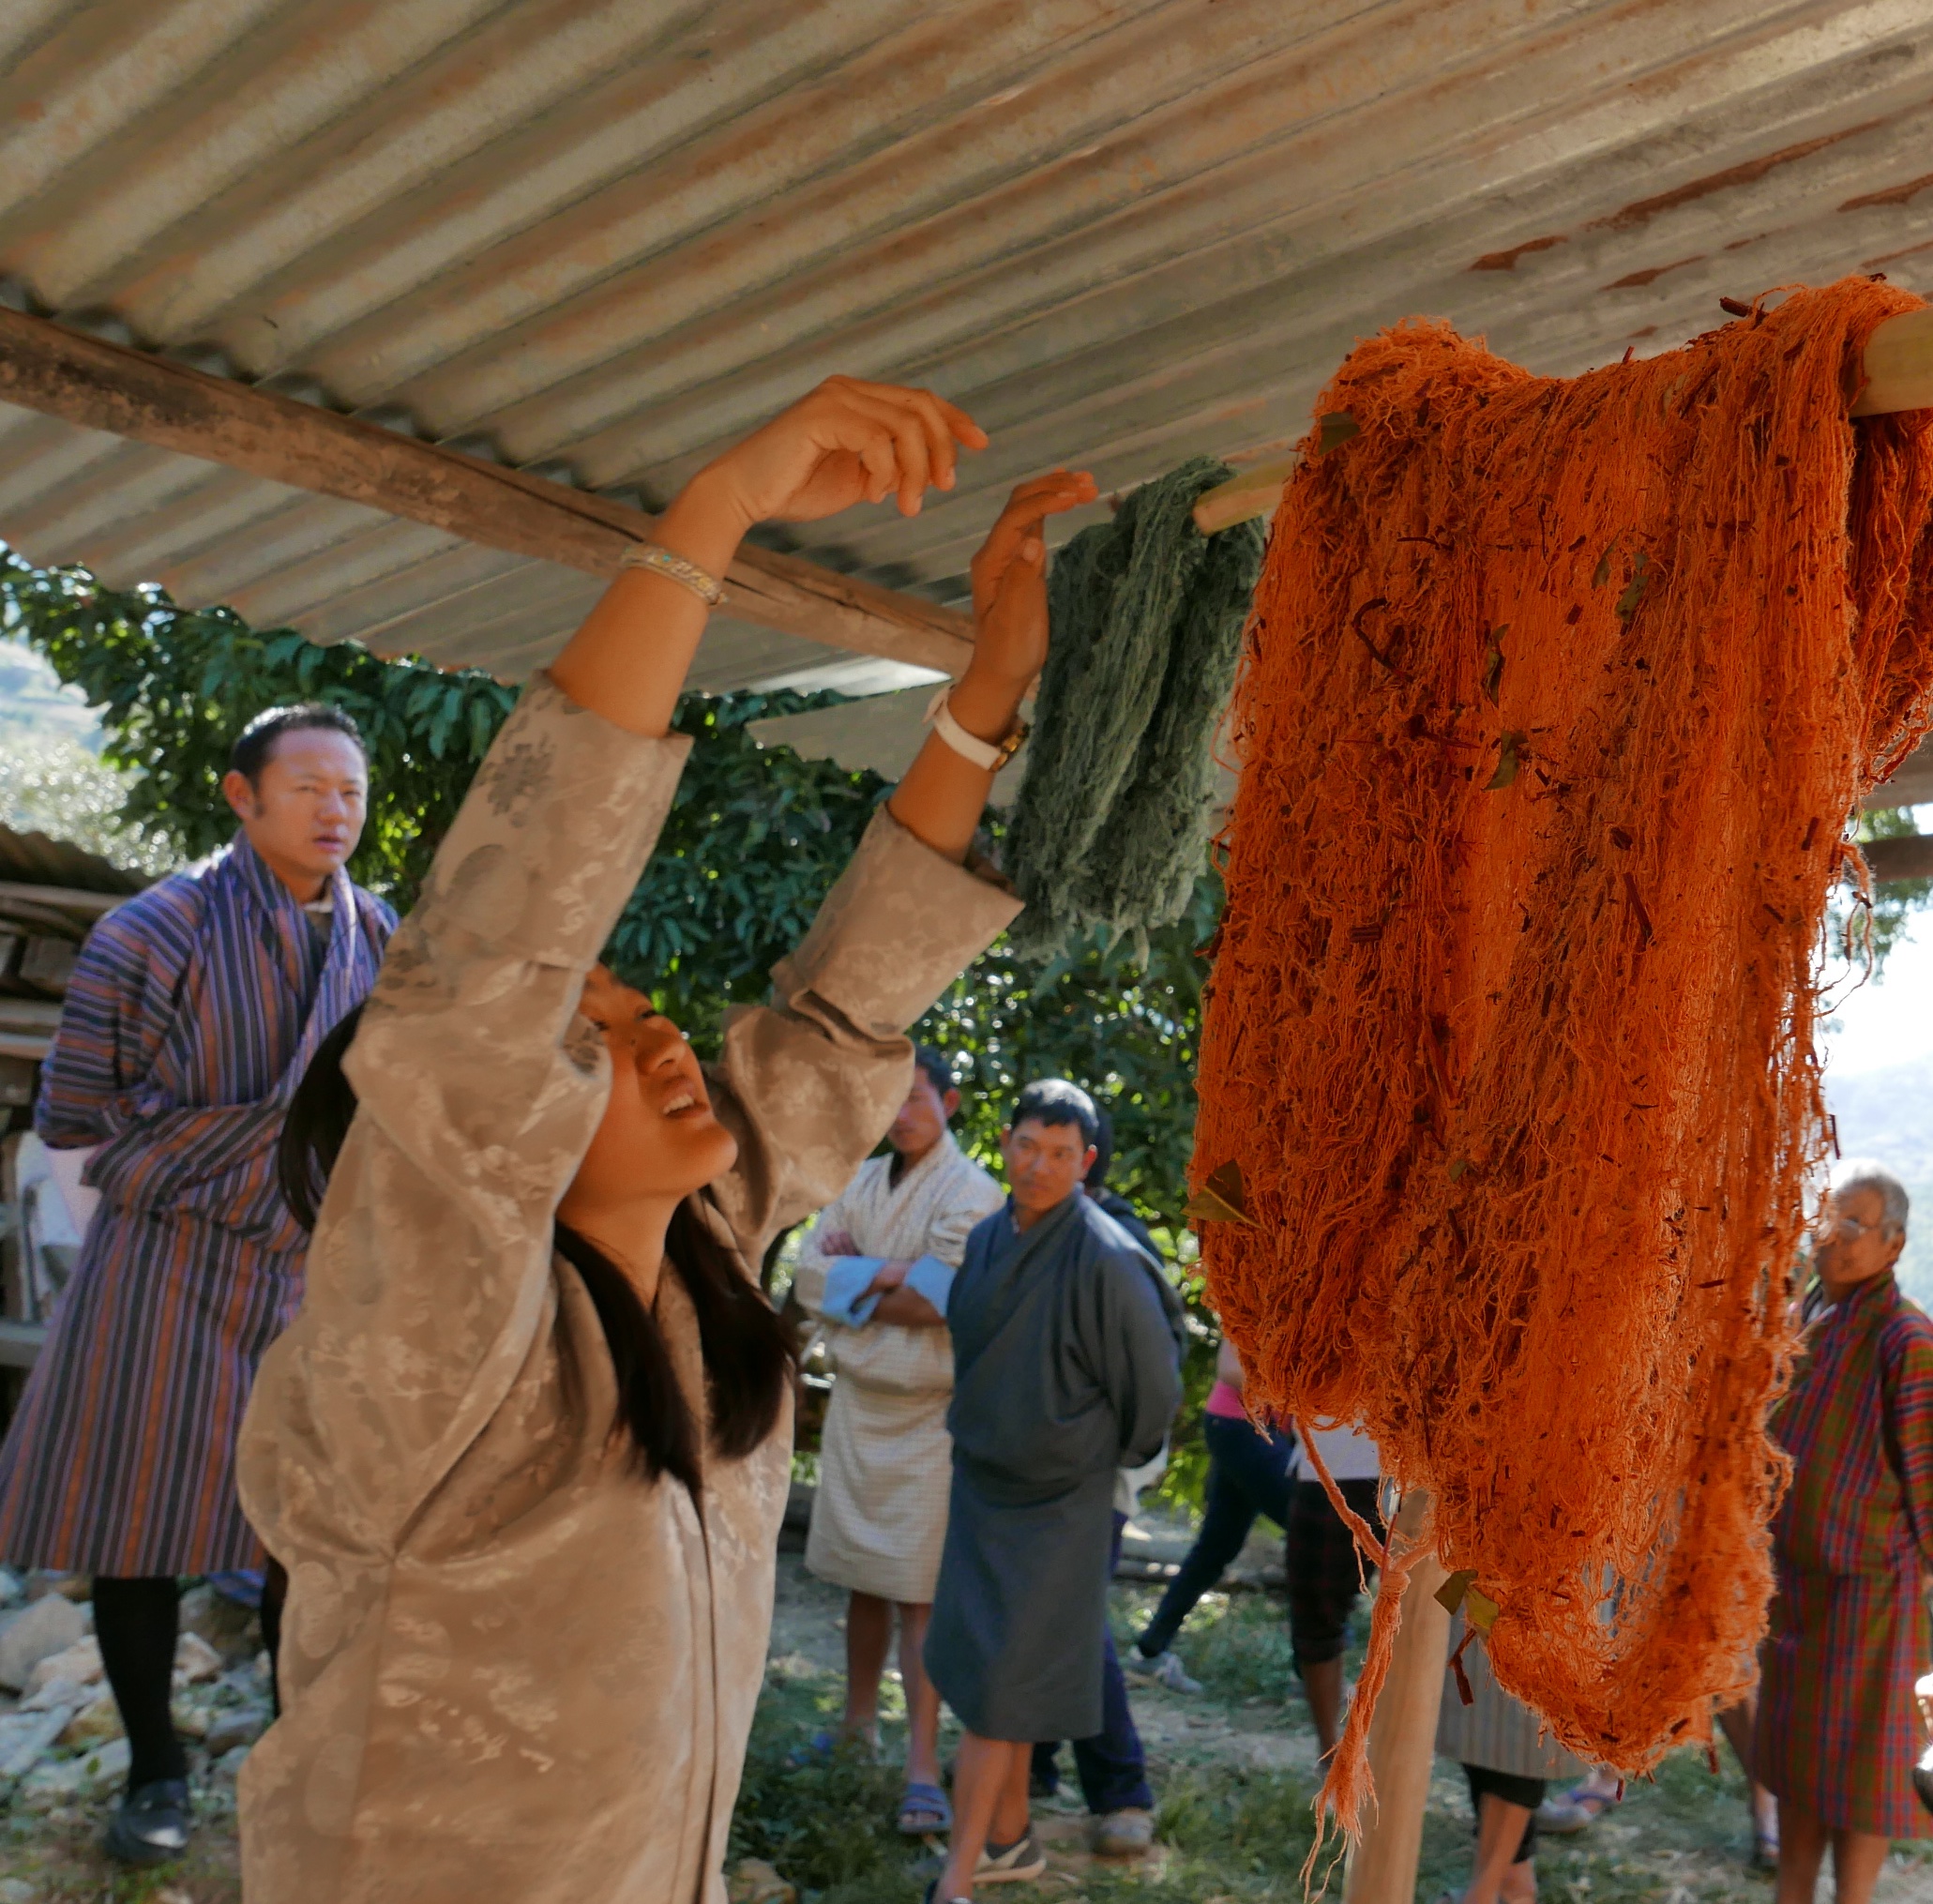 Organically dyed raw silk bales are hung up to dry - demonstration by a grassroots cooperative in Rhadi, Eastern Bhutan